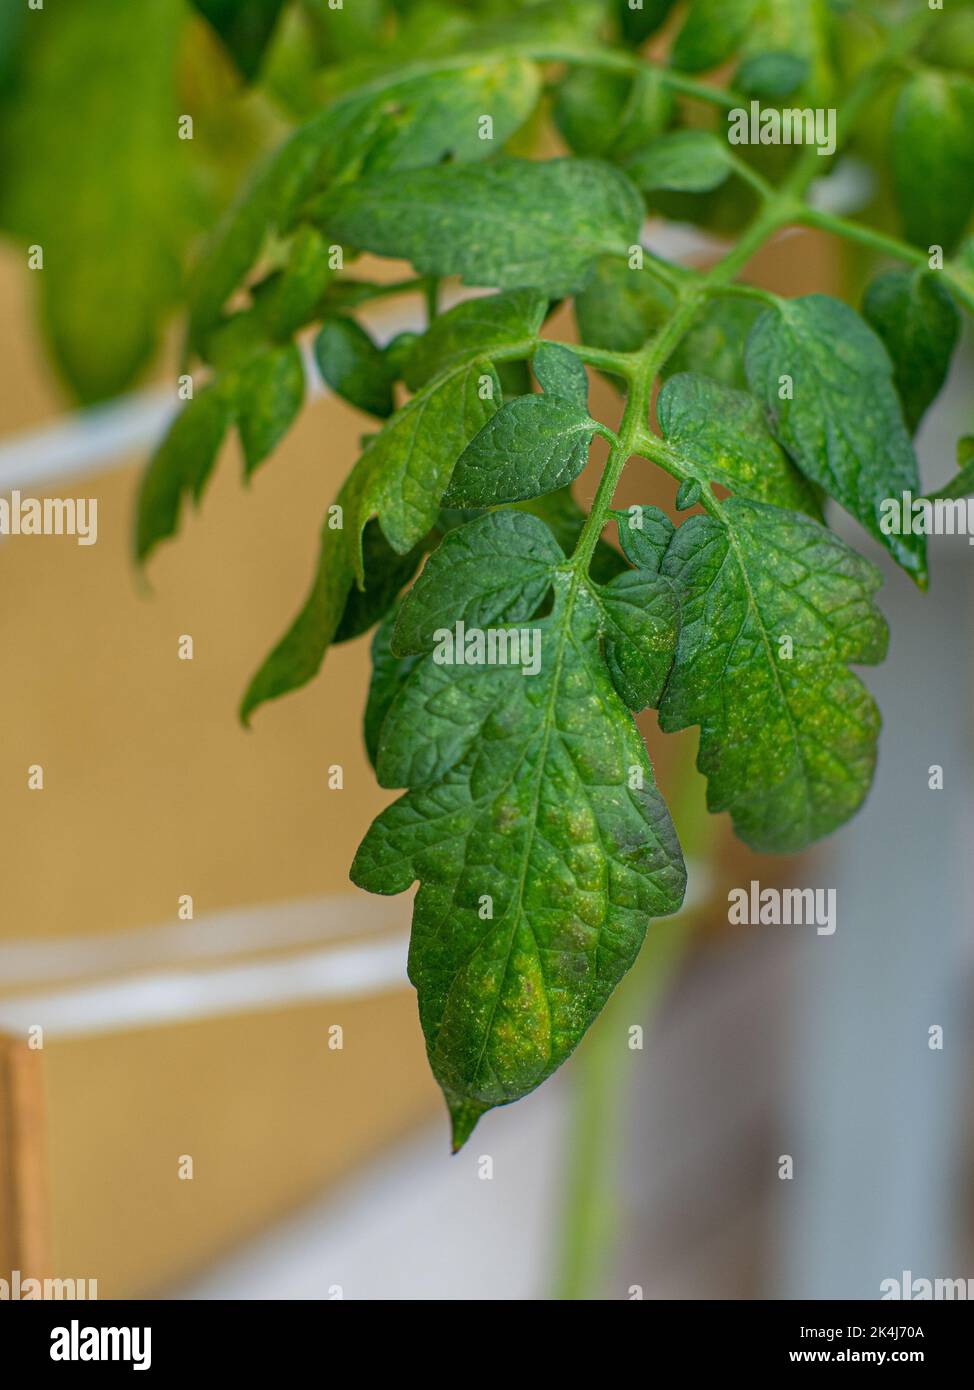 Fungal disease on the tomato leaves. Stock Photo